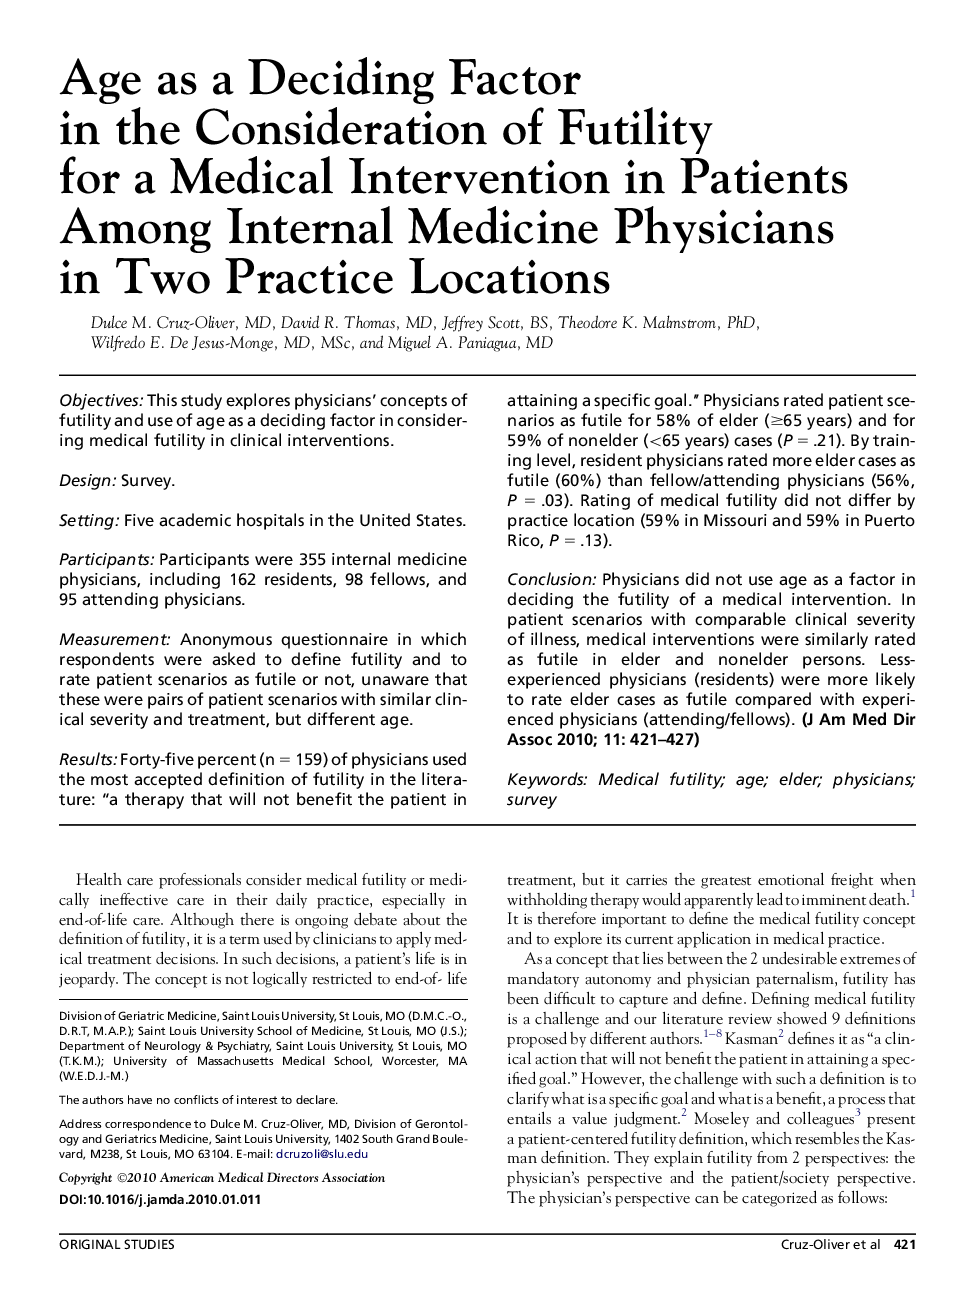 Age as a Deciding Factor in the Consideration of Futility for a Medical Intervention in Patients Among Internal Medicine Physicians in Two Practice Locations